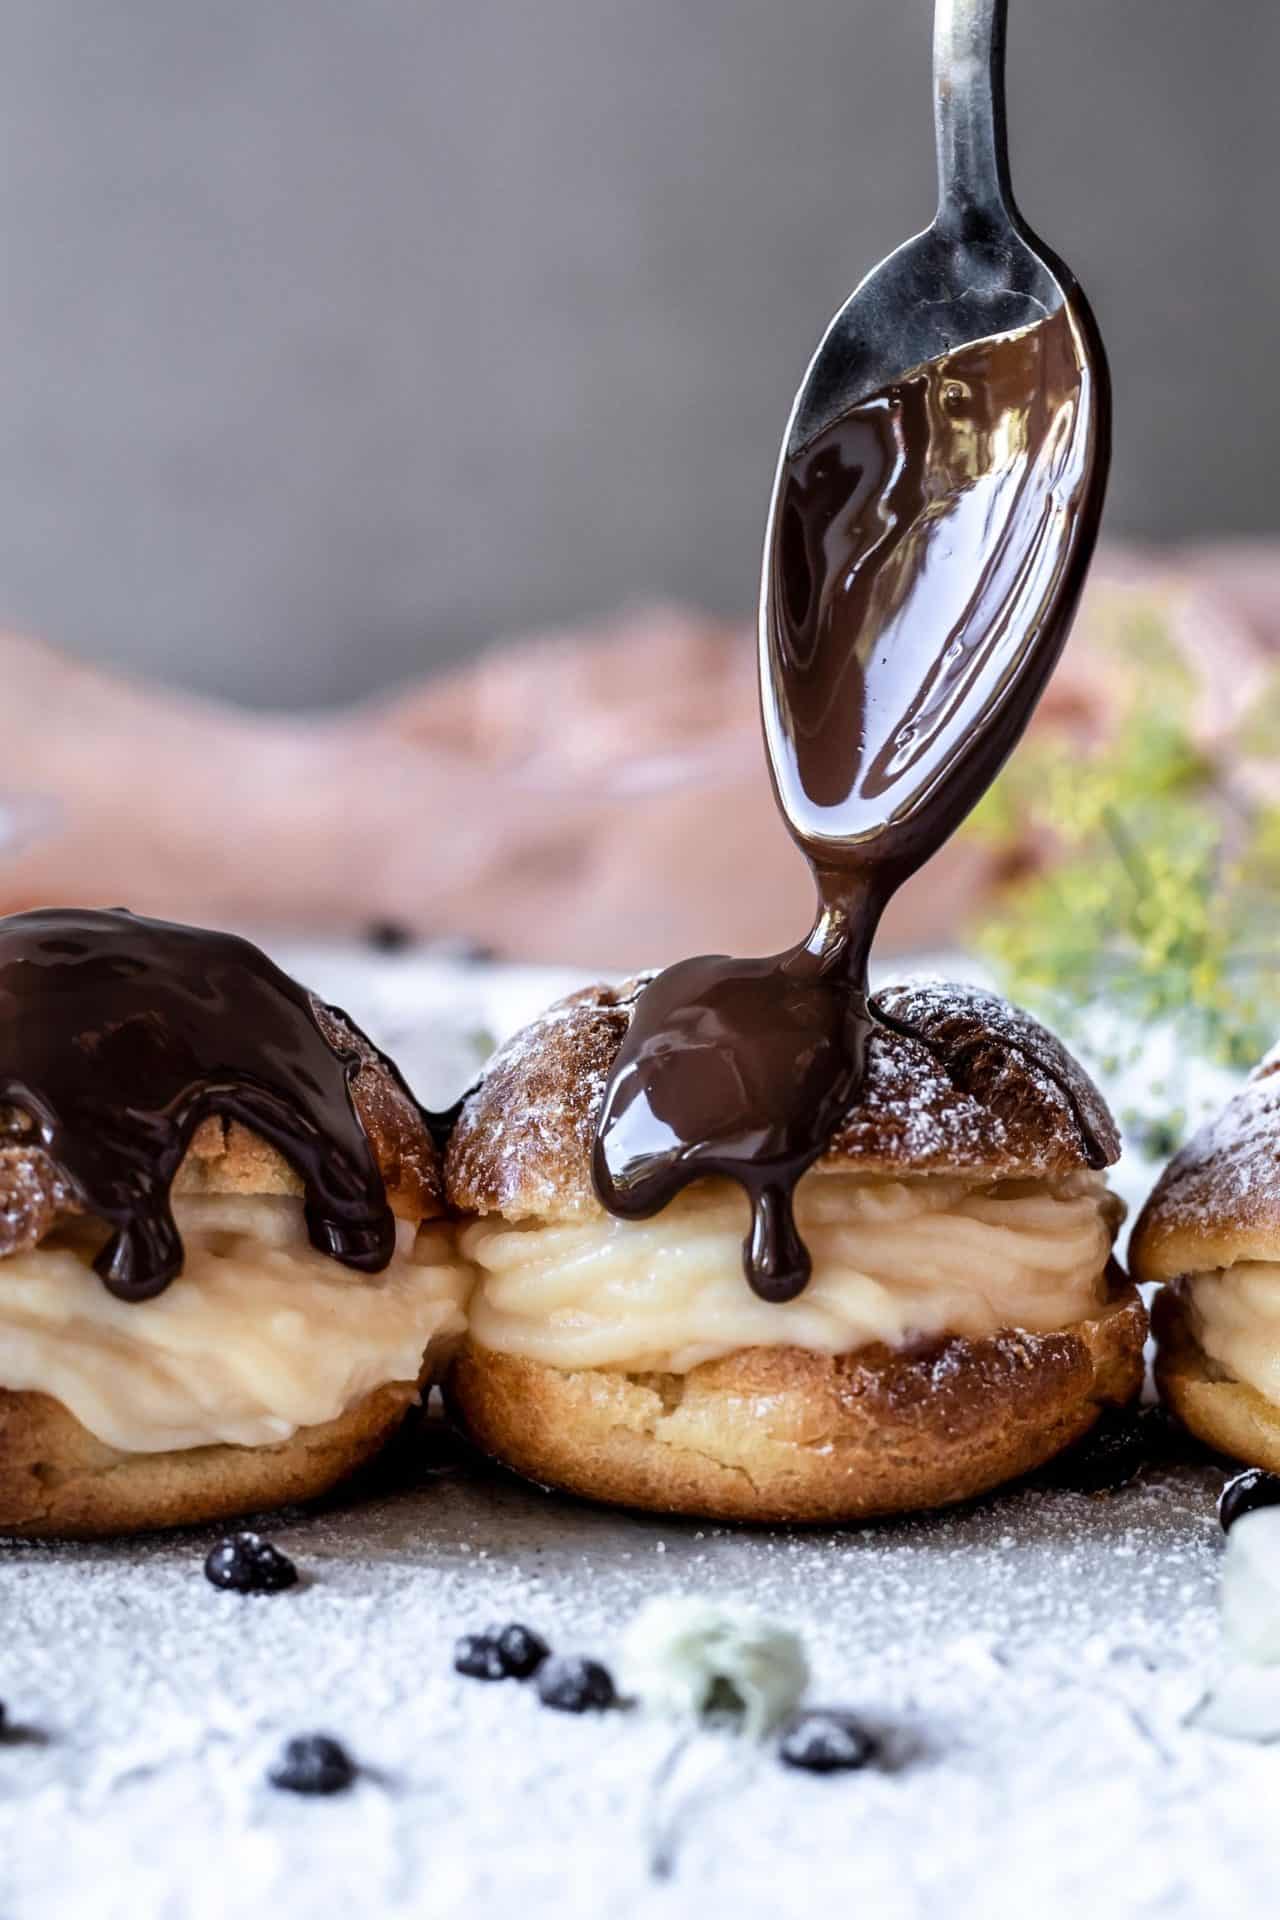 These Gluten Free Profiteroles are crispy, light, perfectly sweetened, bursting with creamy pastry cream and so delicious!